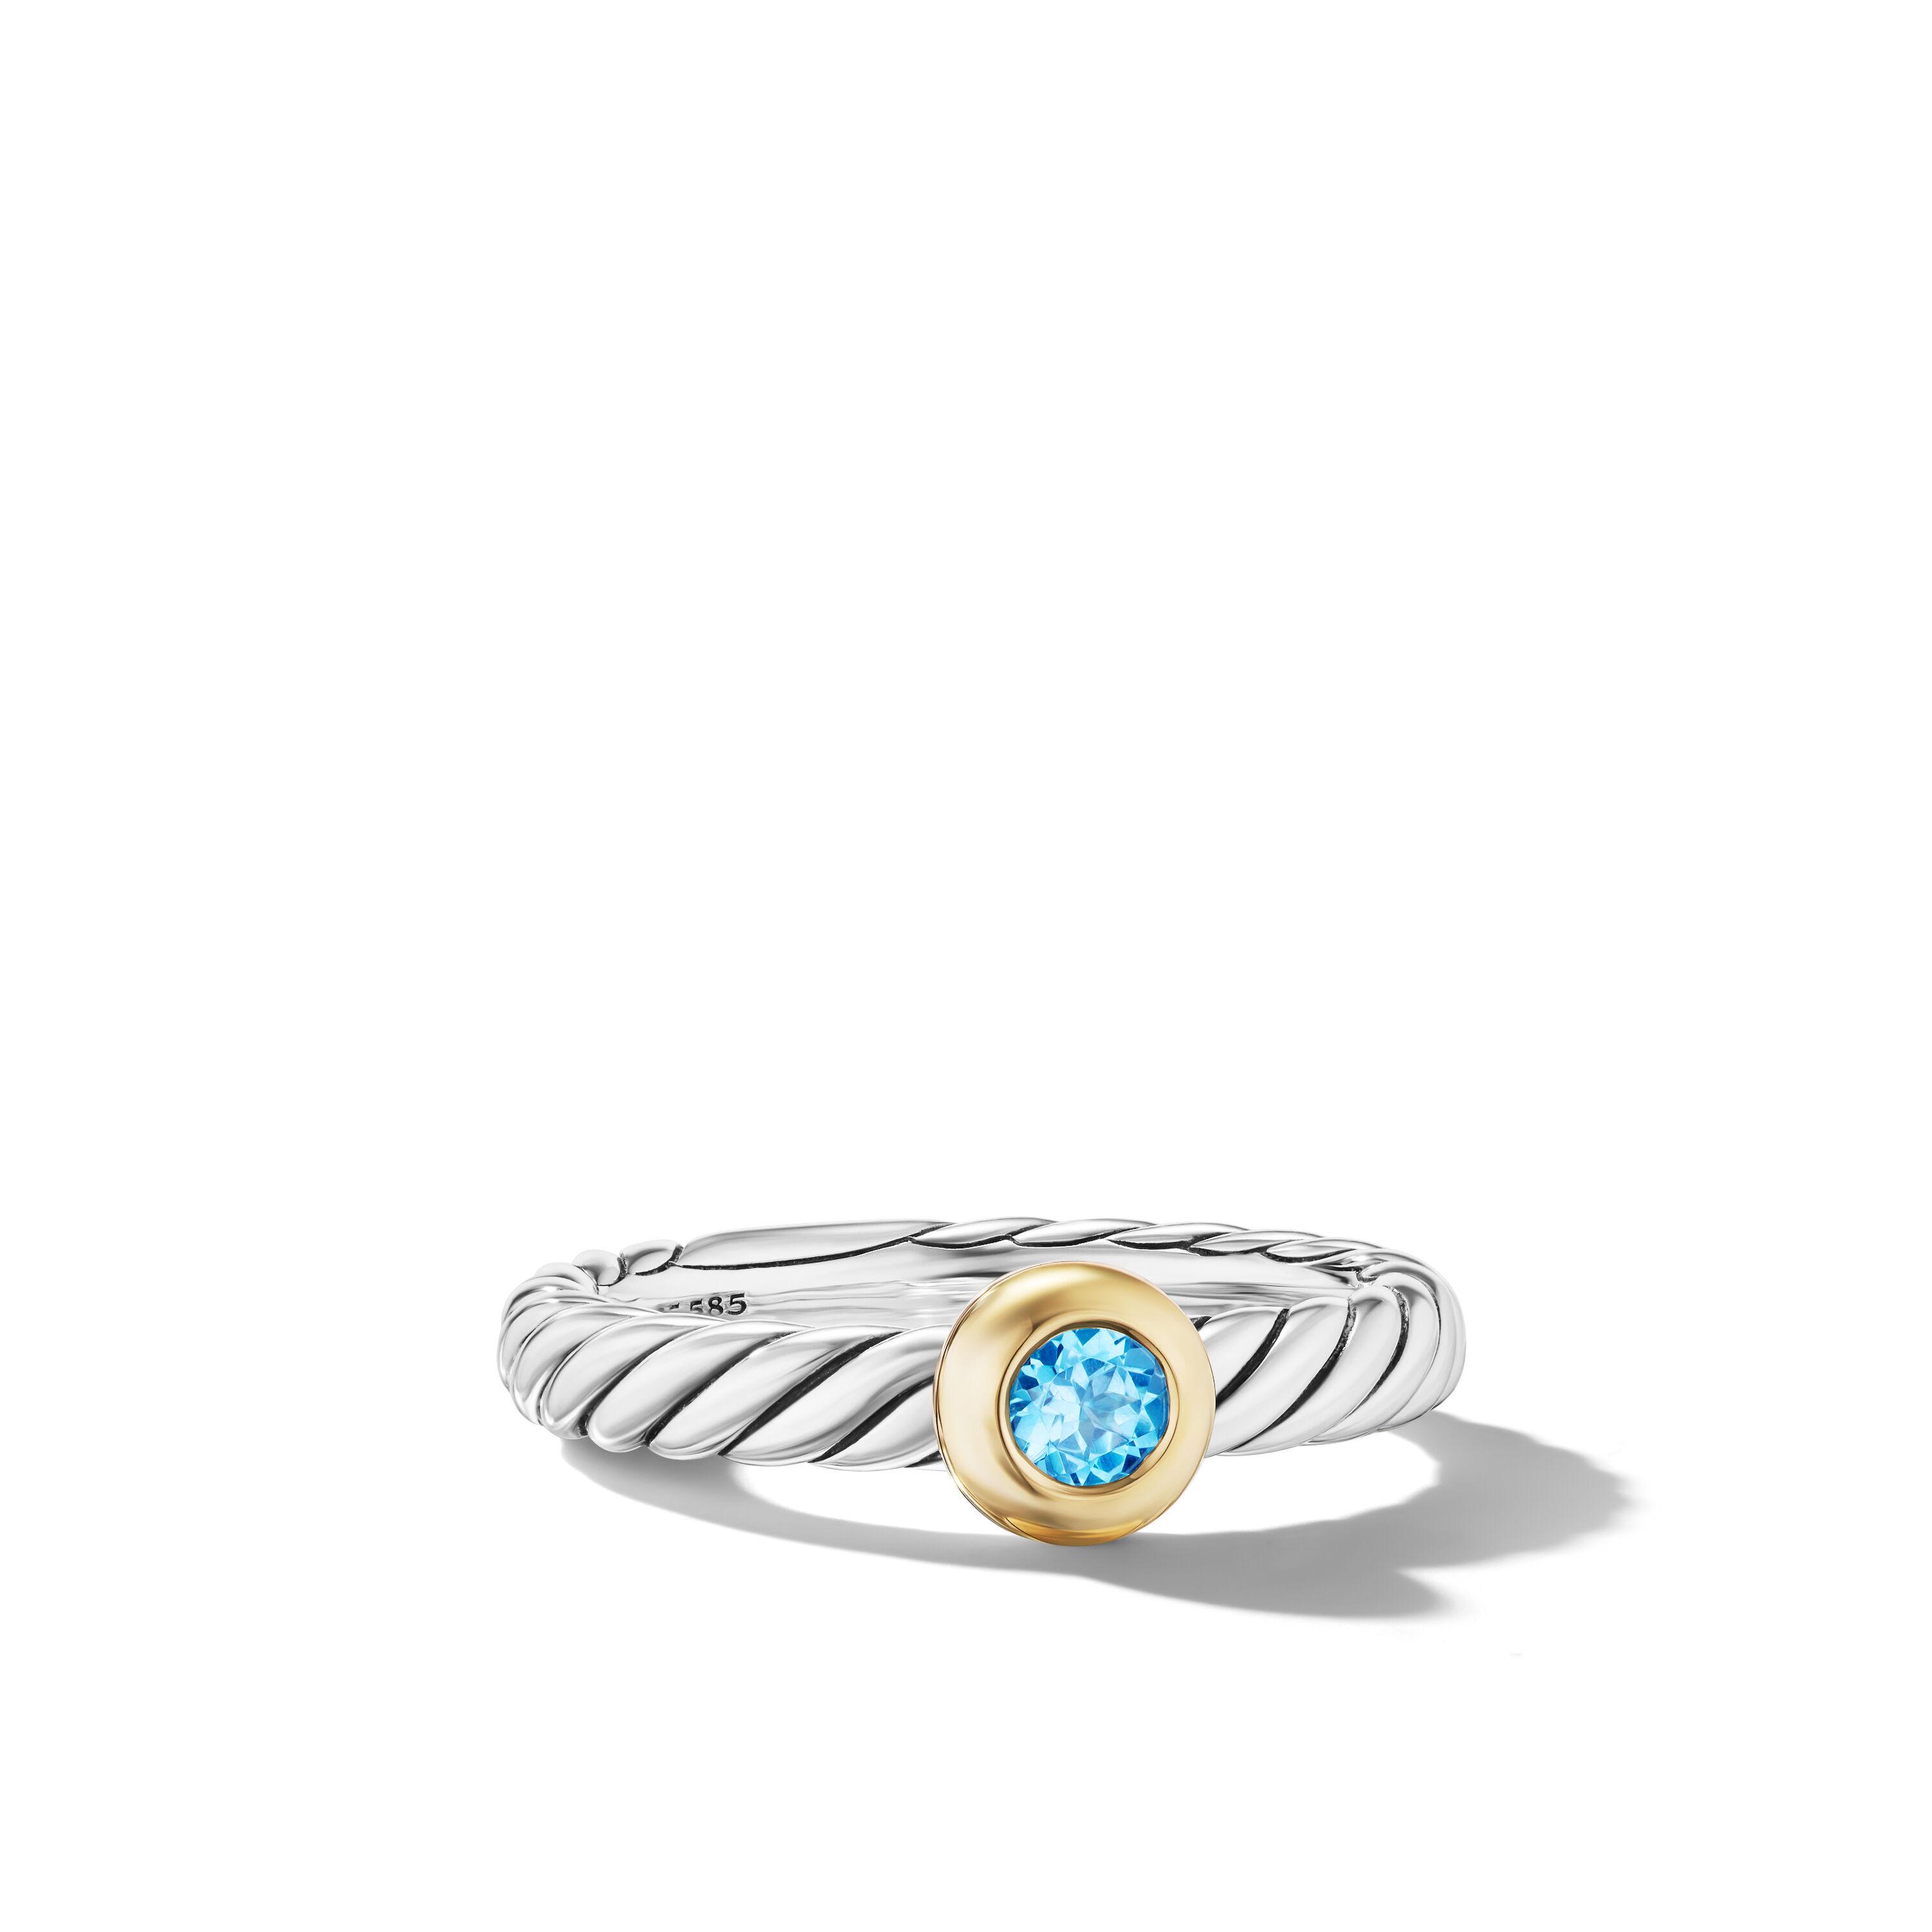 David Yurman Petite Cable Ring in Sterling Silver with 14K Yellow Gold and Blue Topaz, Size 6 0